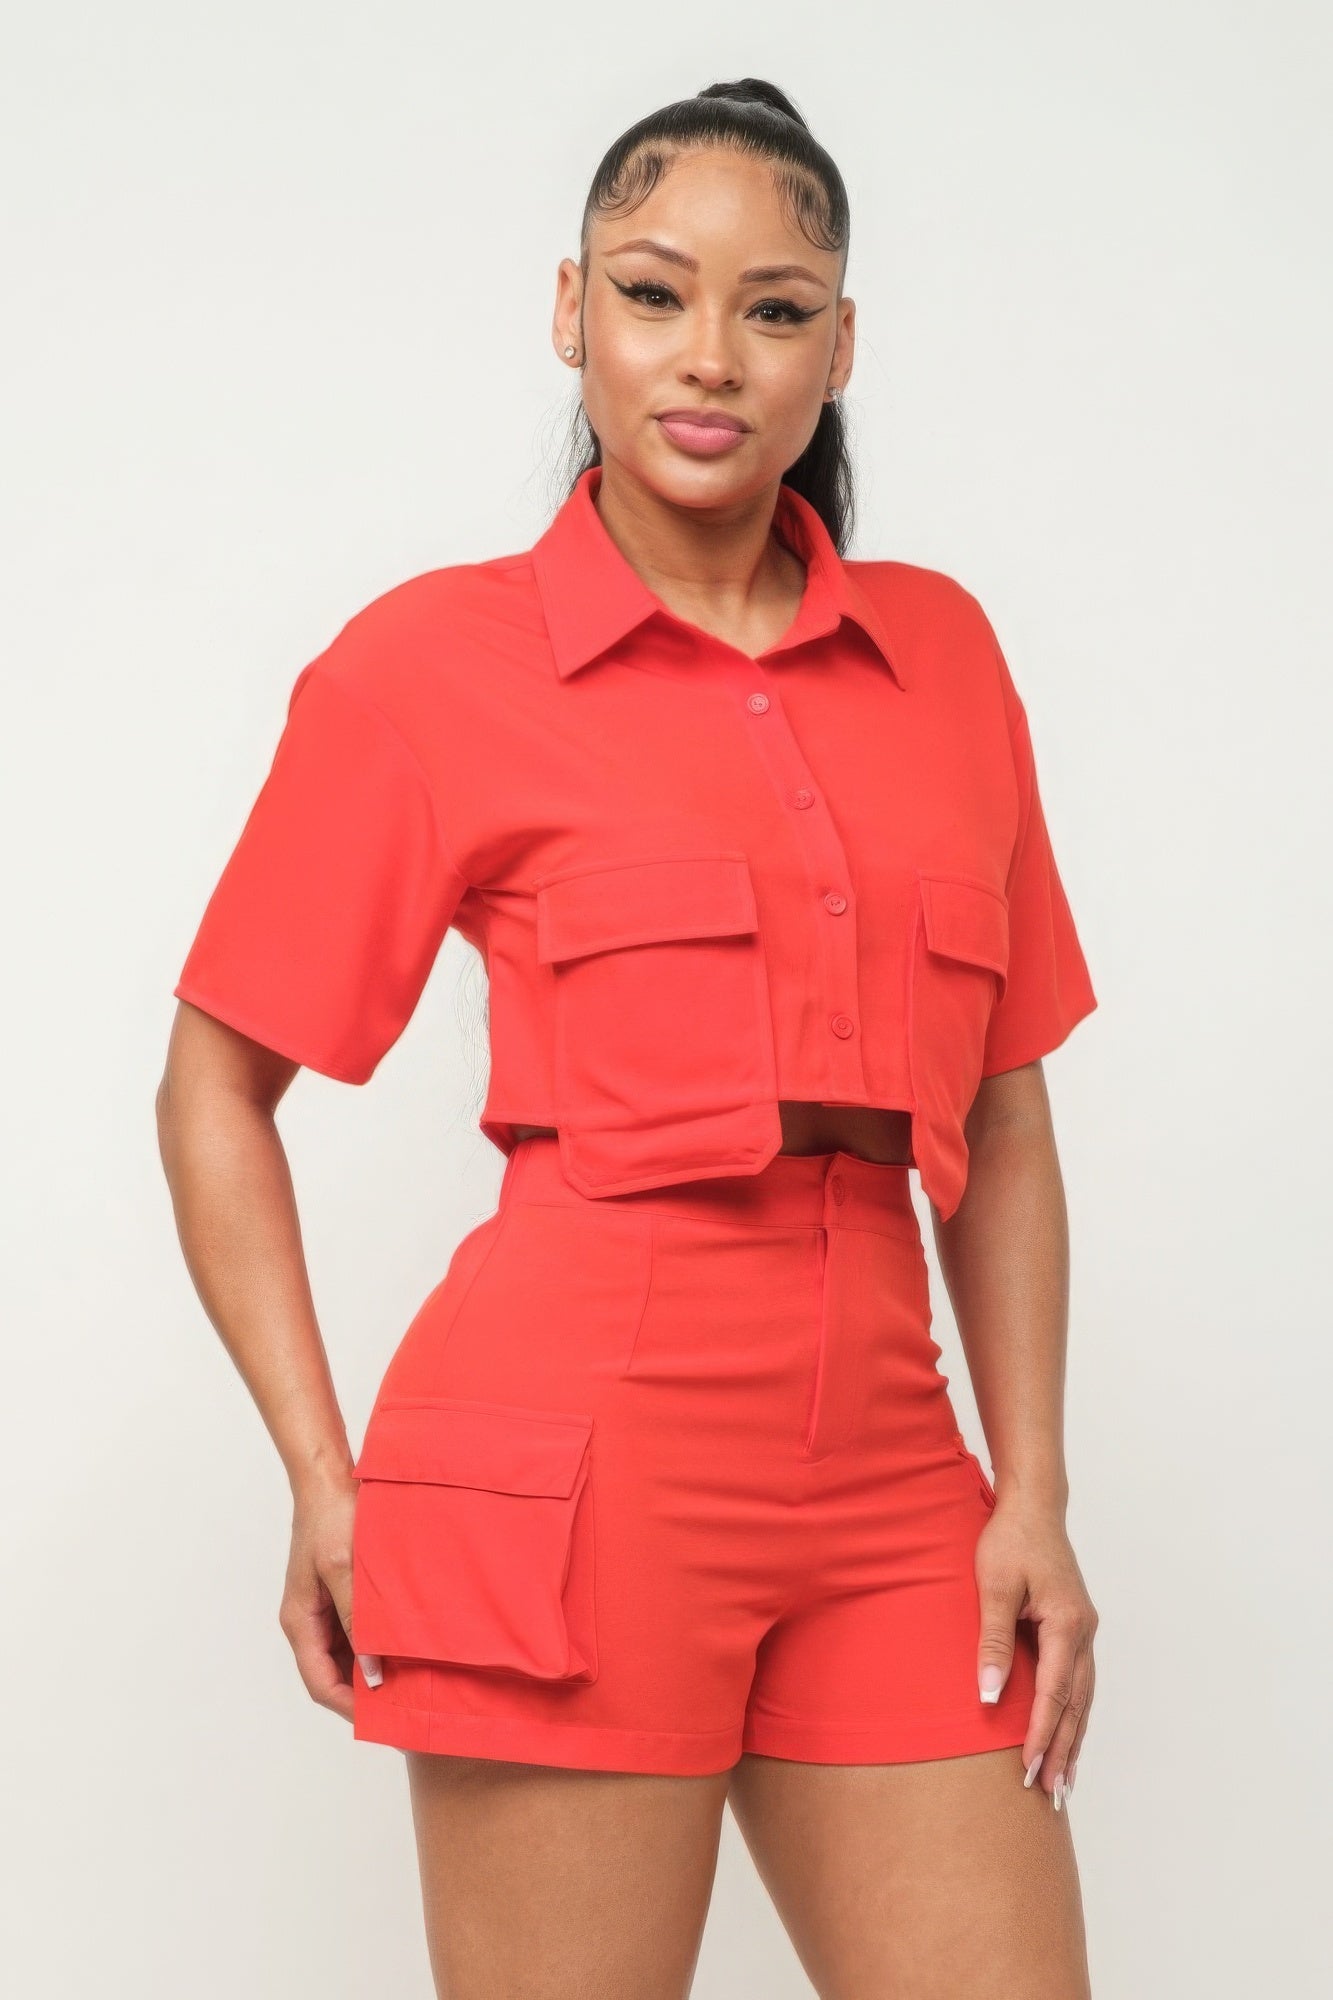 Front Button Down Side Pockets Top And Shorts Set-58462b.S-Select Size: S, M, L-Love It Clothing